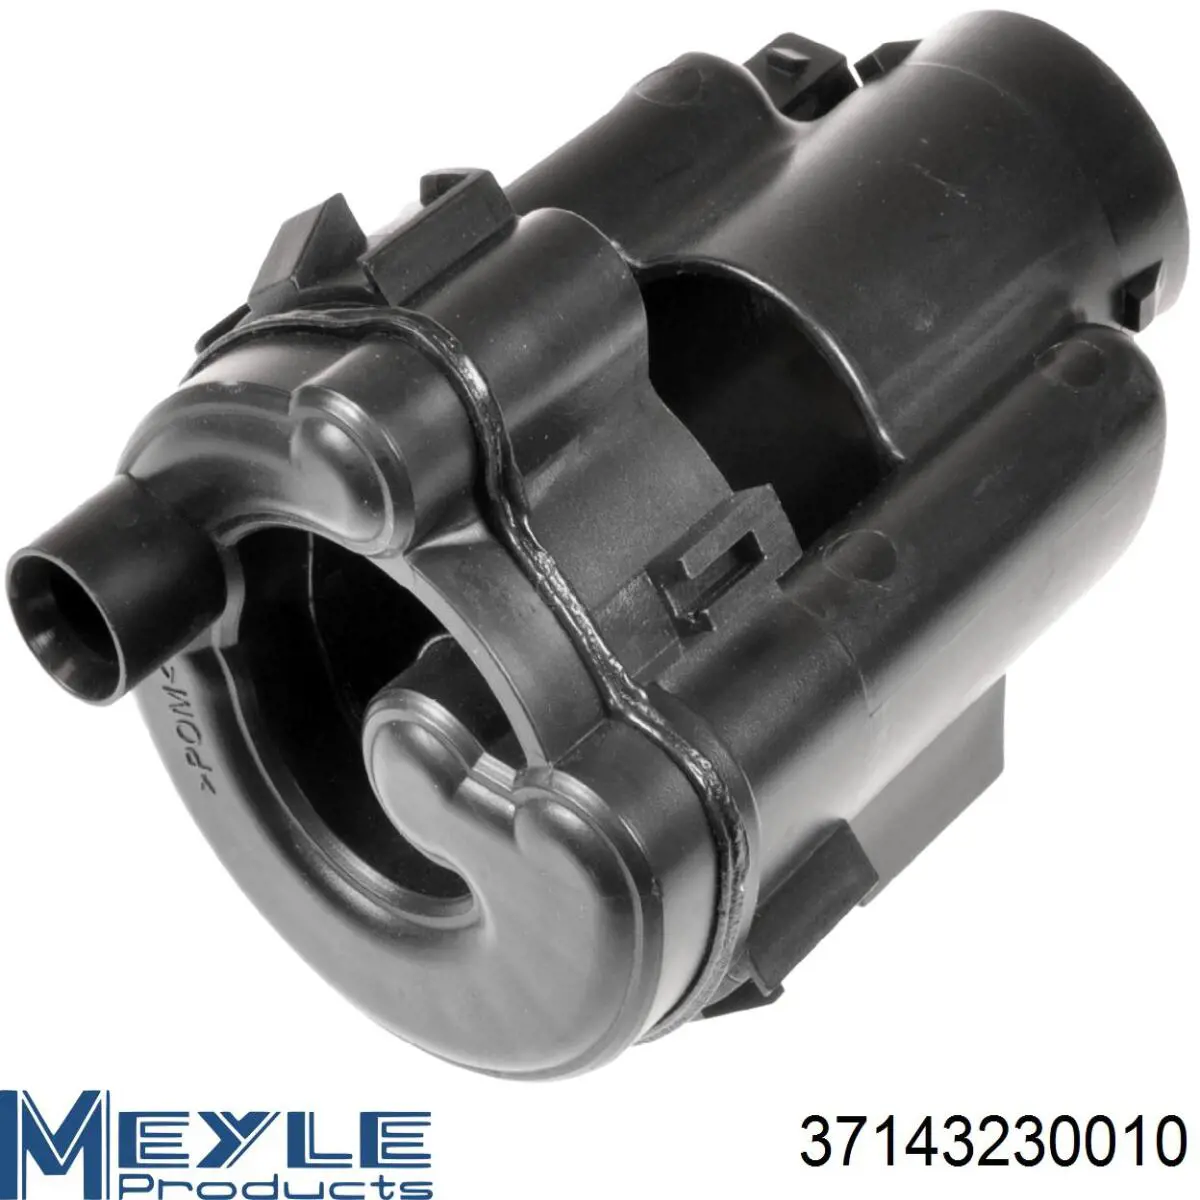 37143230010 Meyle filtro combustible